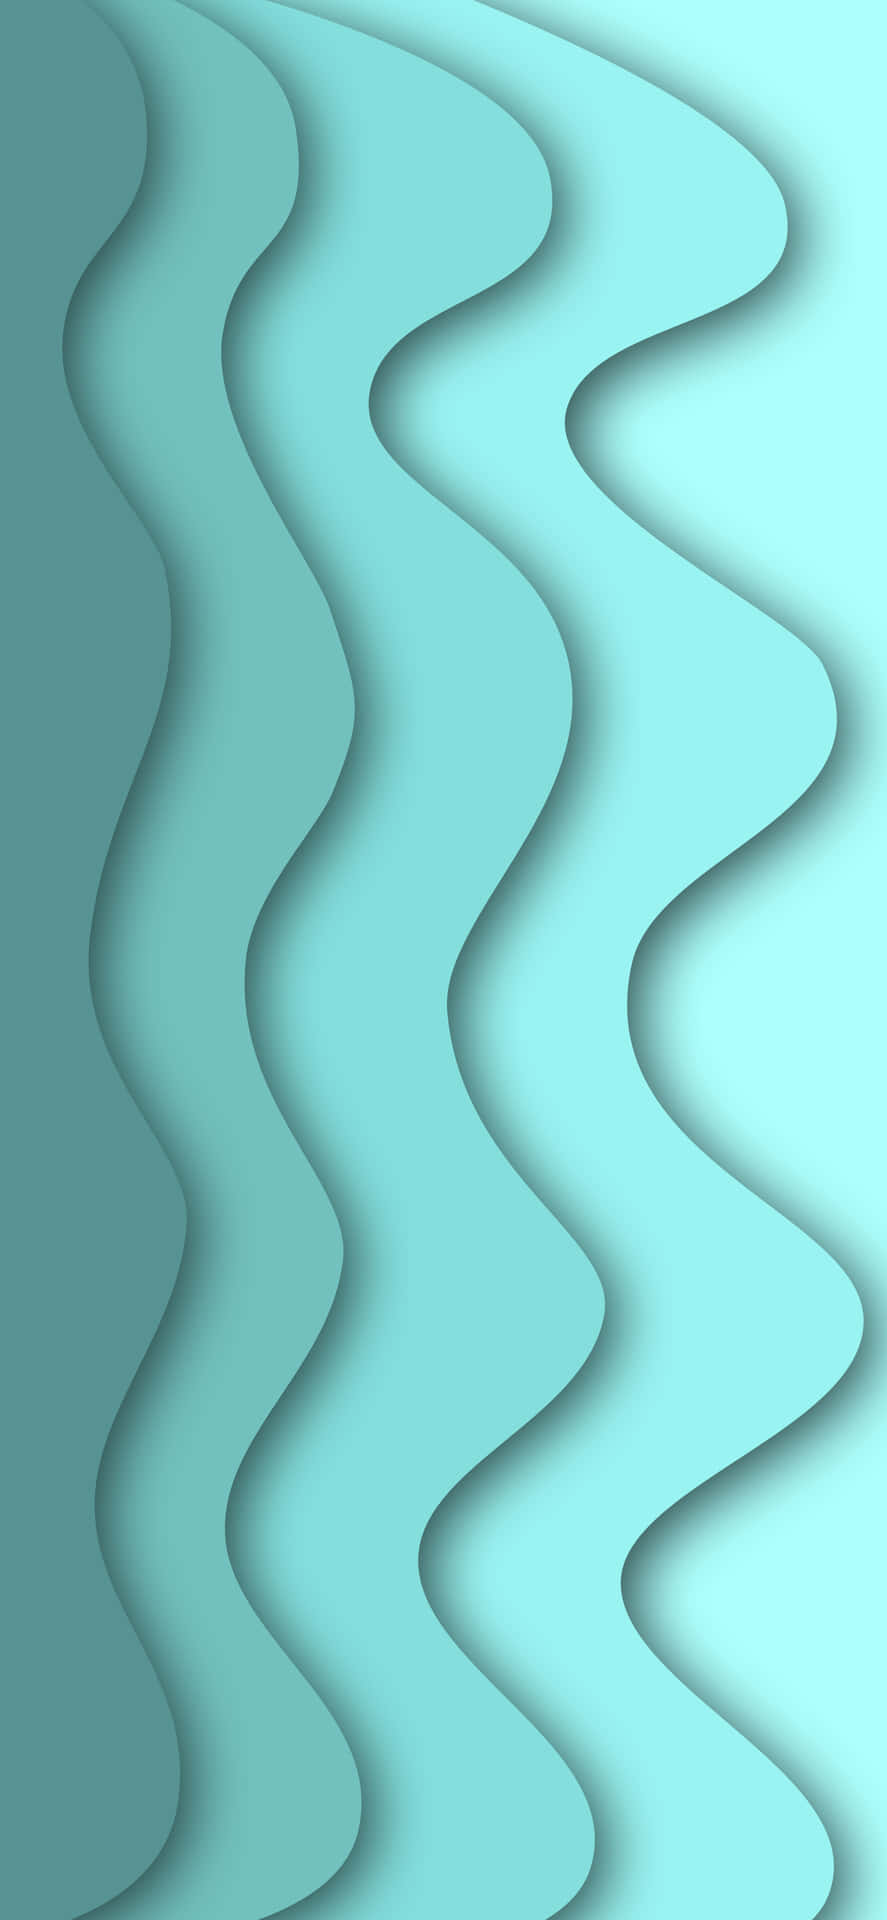 Take a Dive Into the Colorful World of the Turquoise iPhone Wallpaper